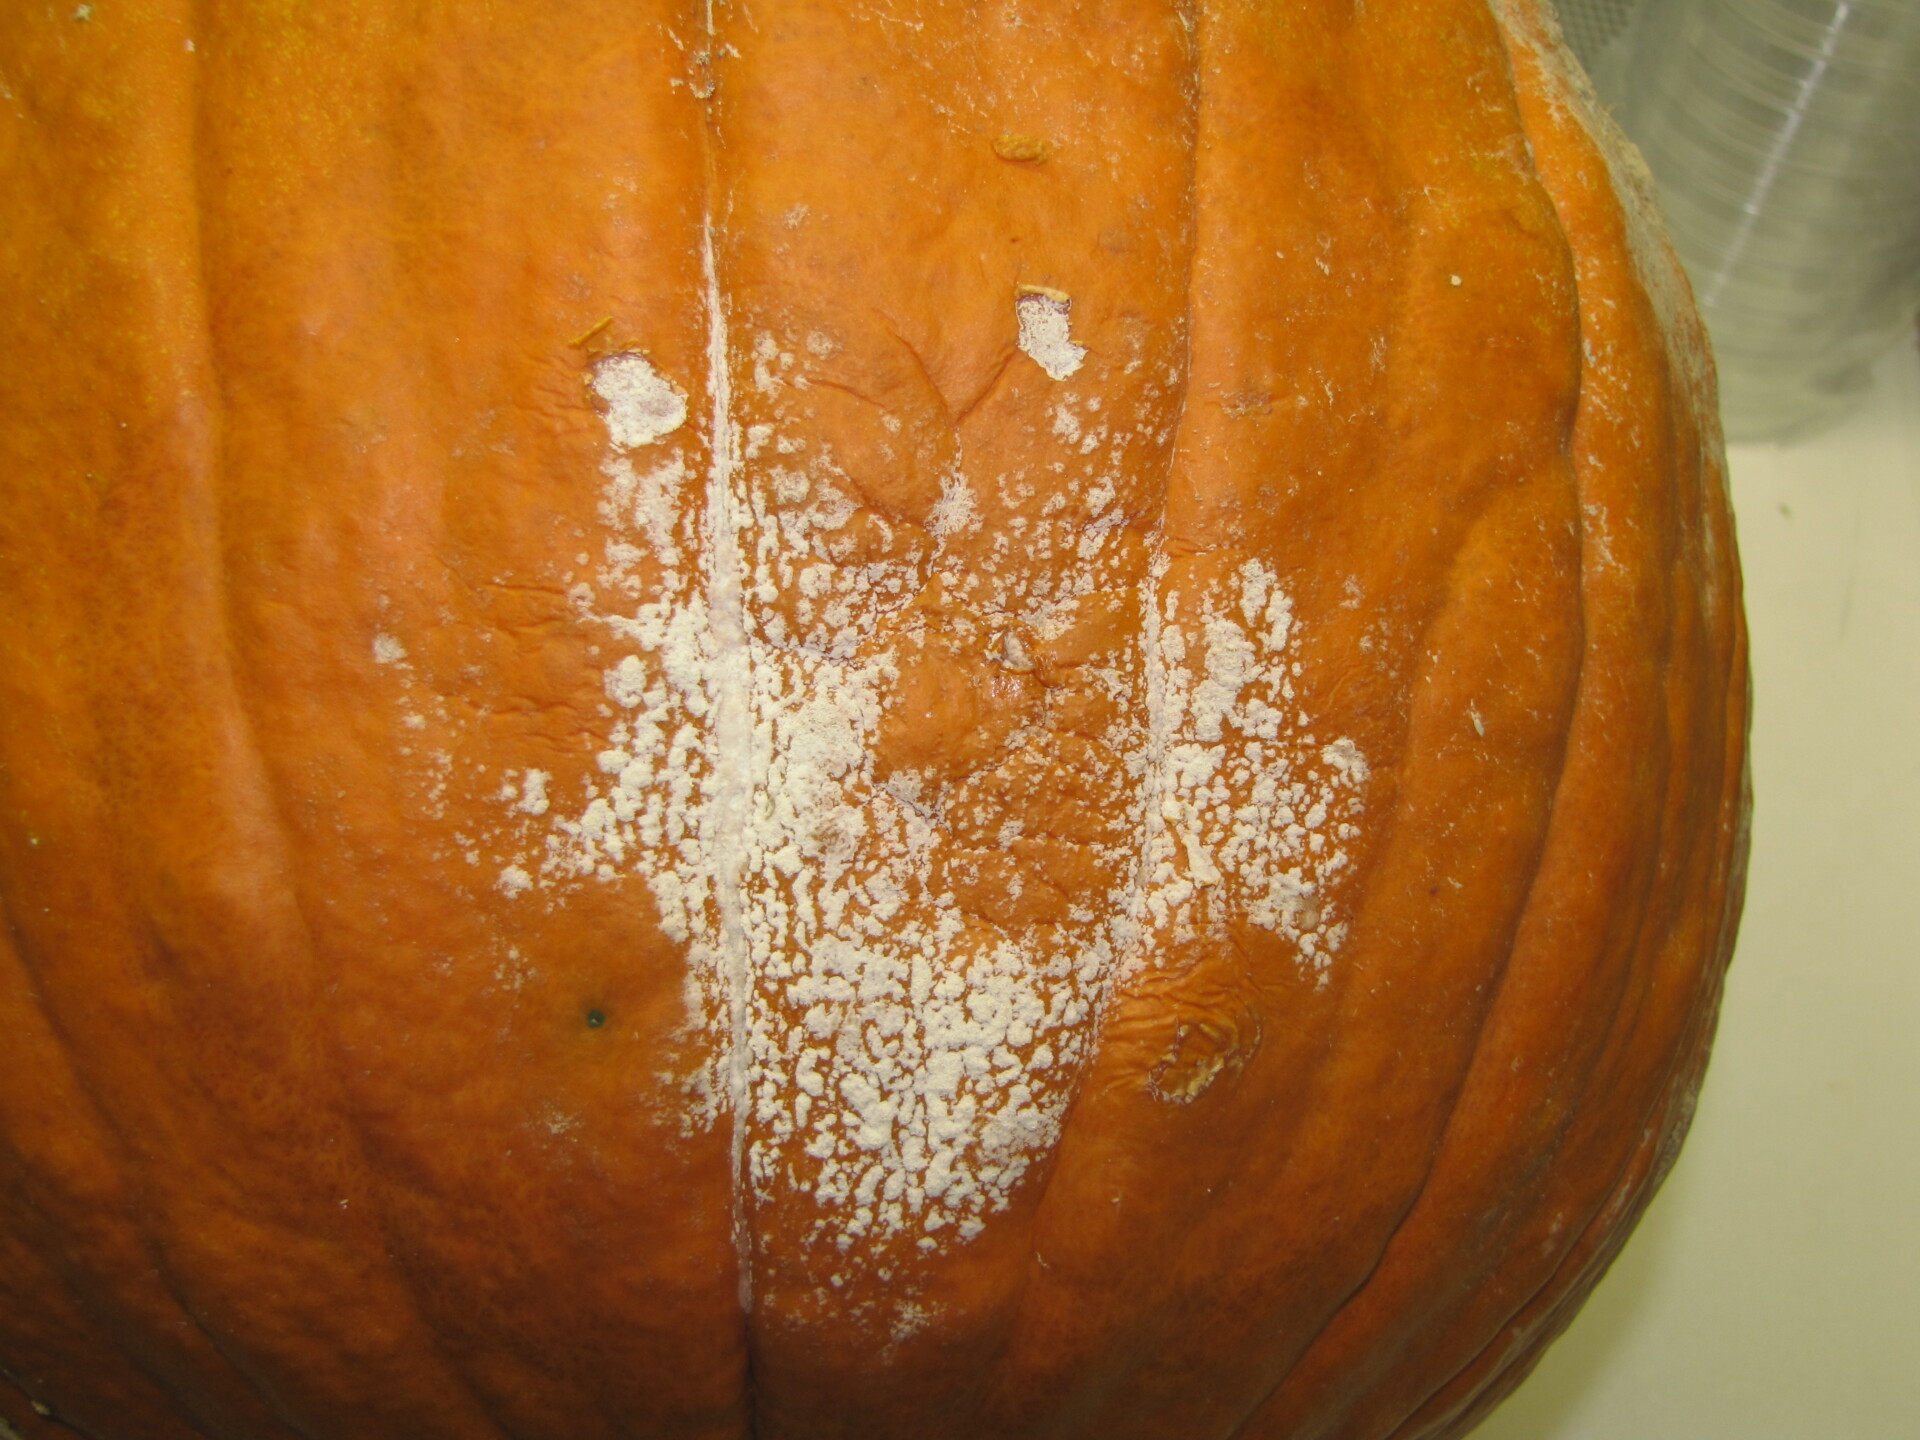 Phytophthora fruit rot of pumpkin.